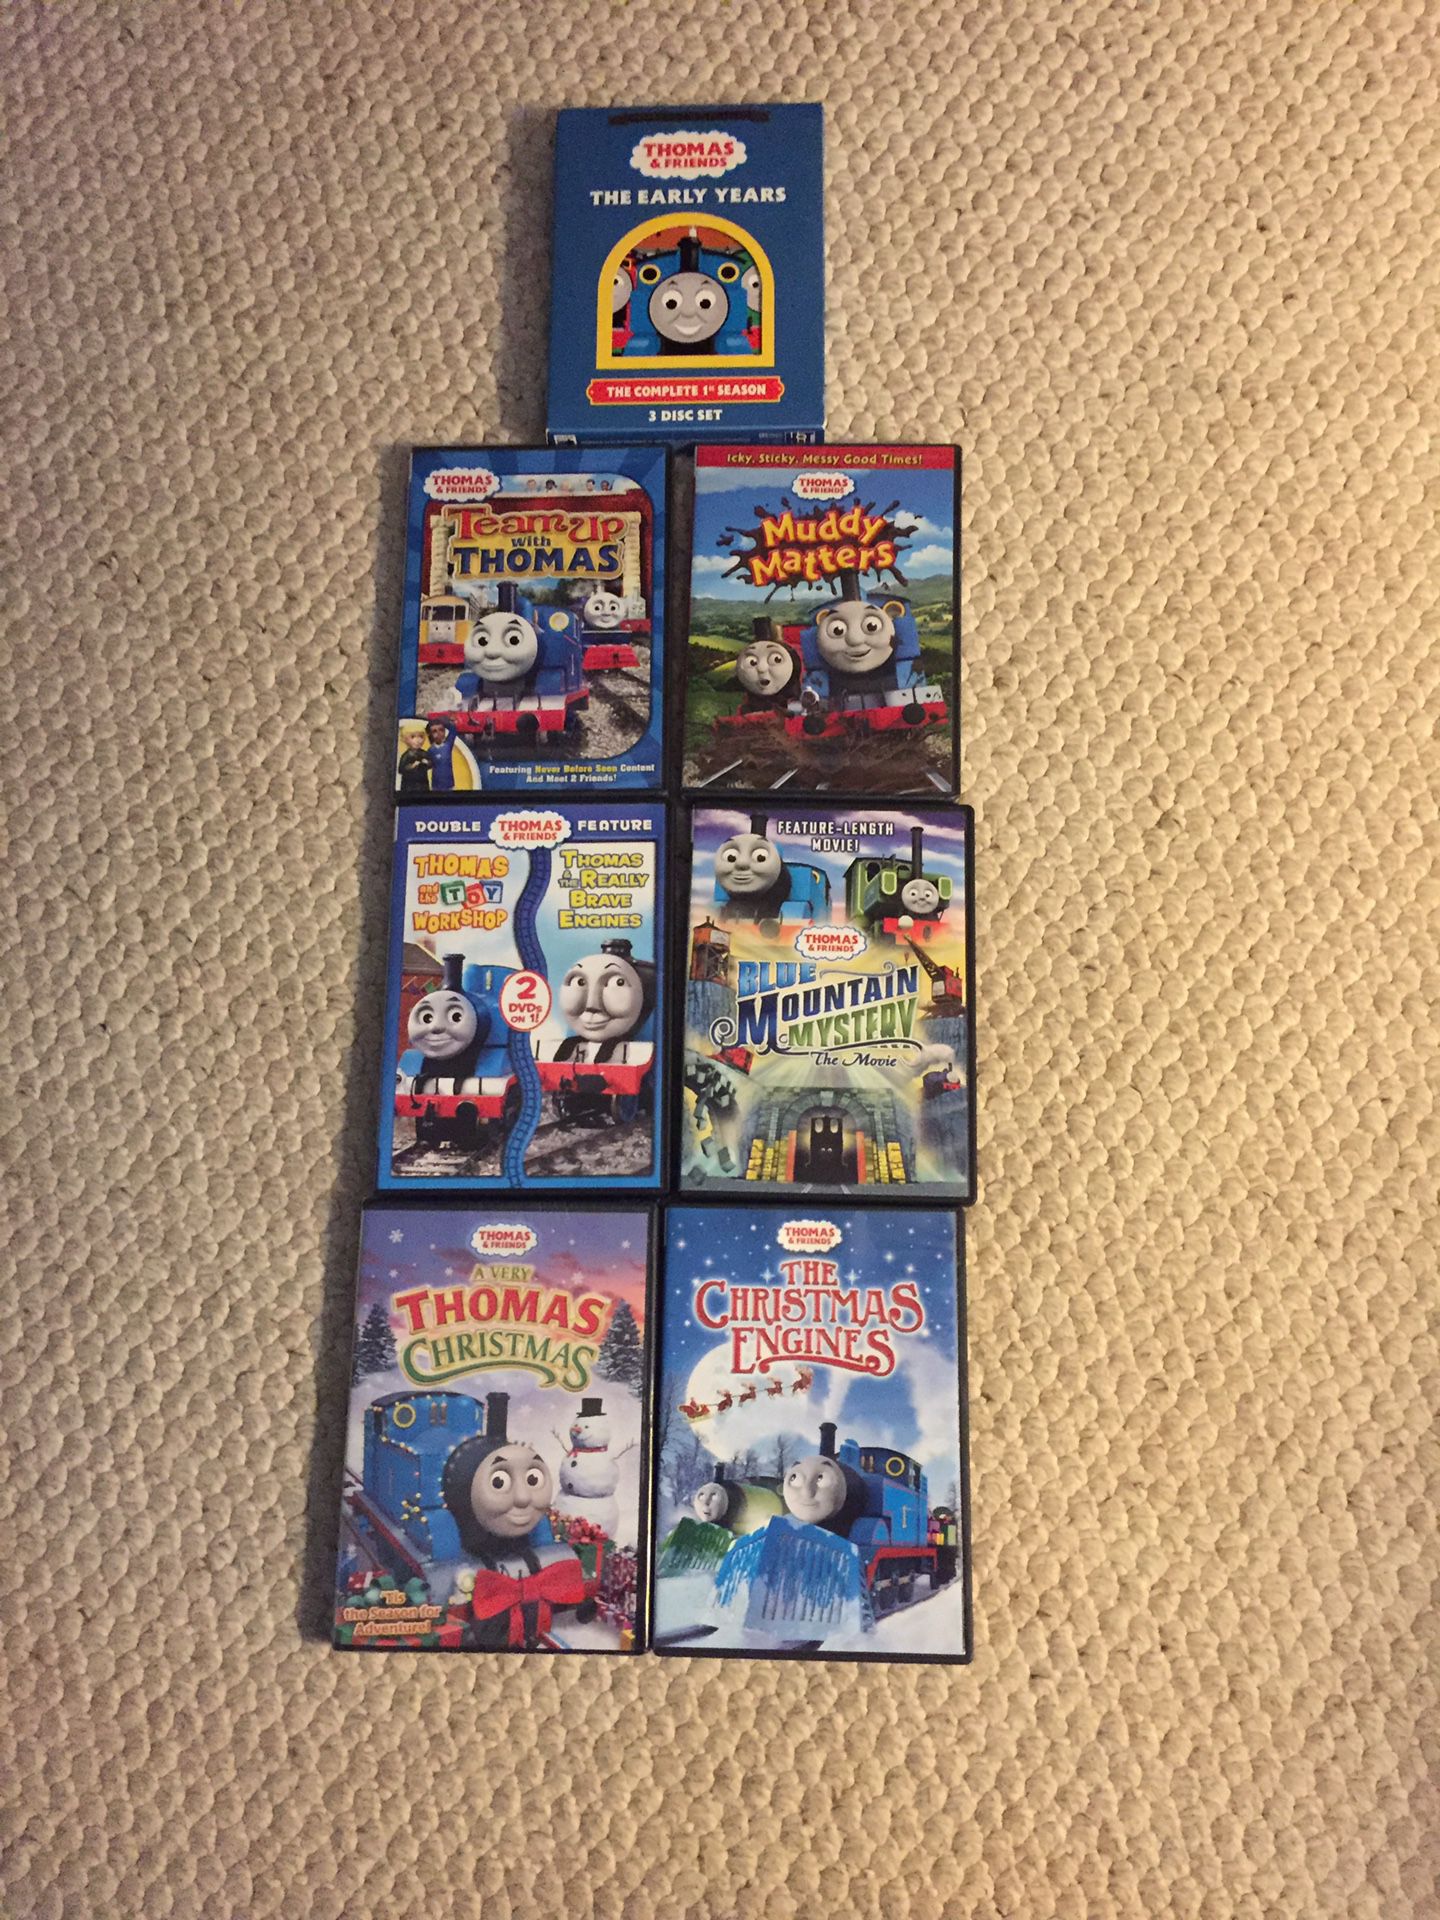 Thomas the Tank Engine DVD’s. New and Rarely Used